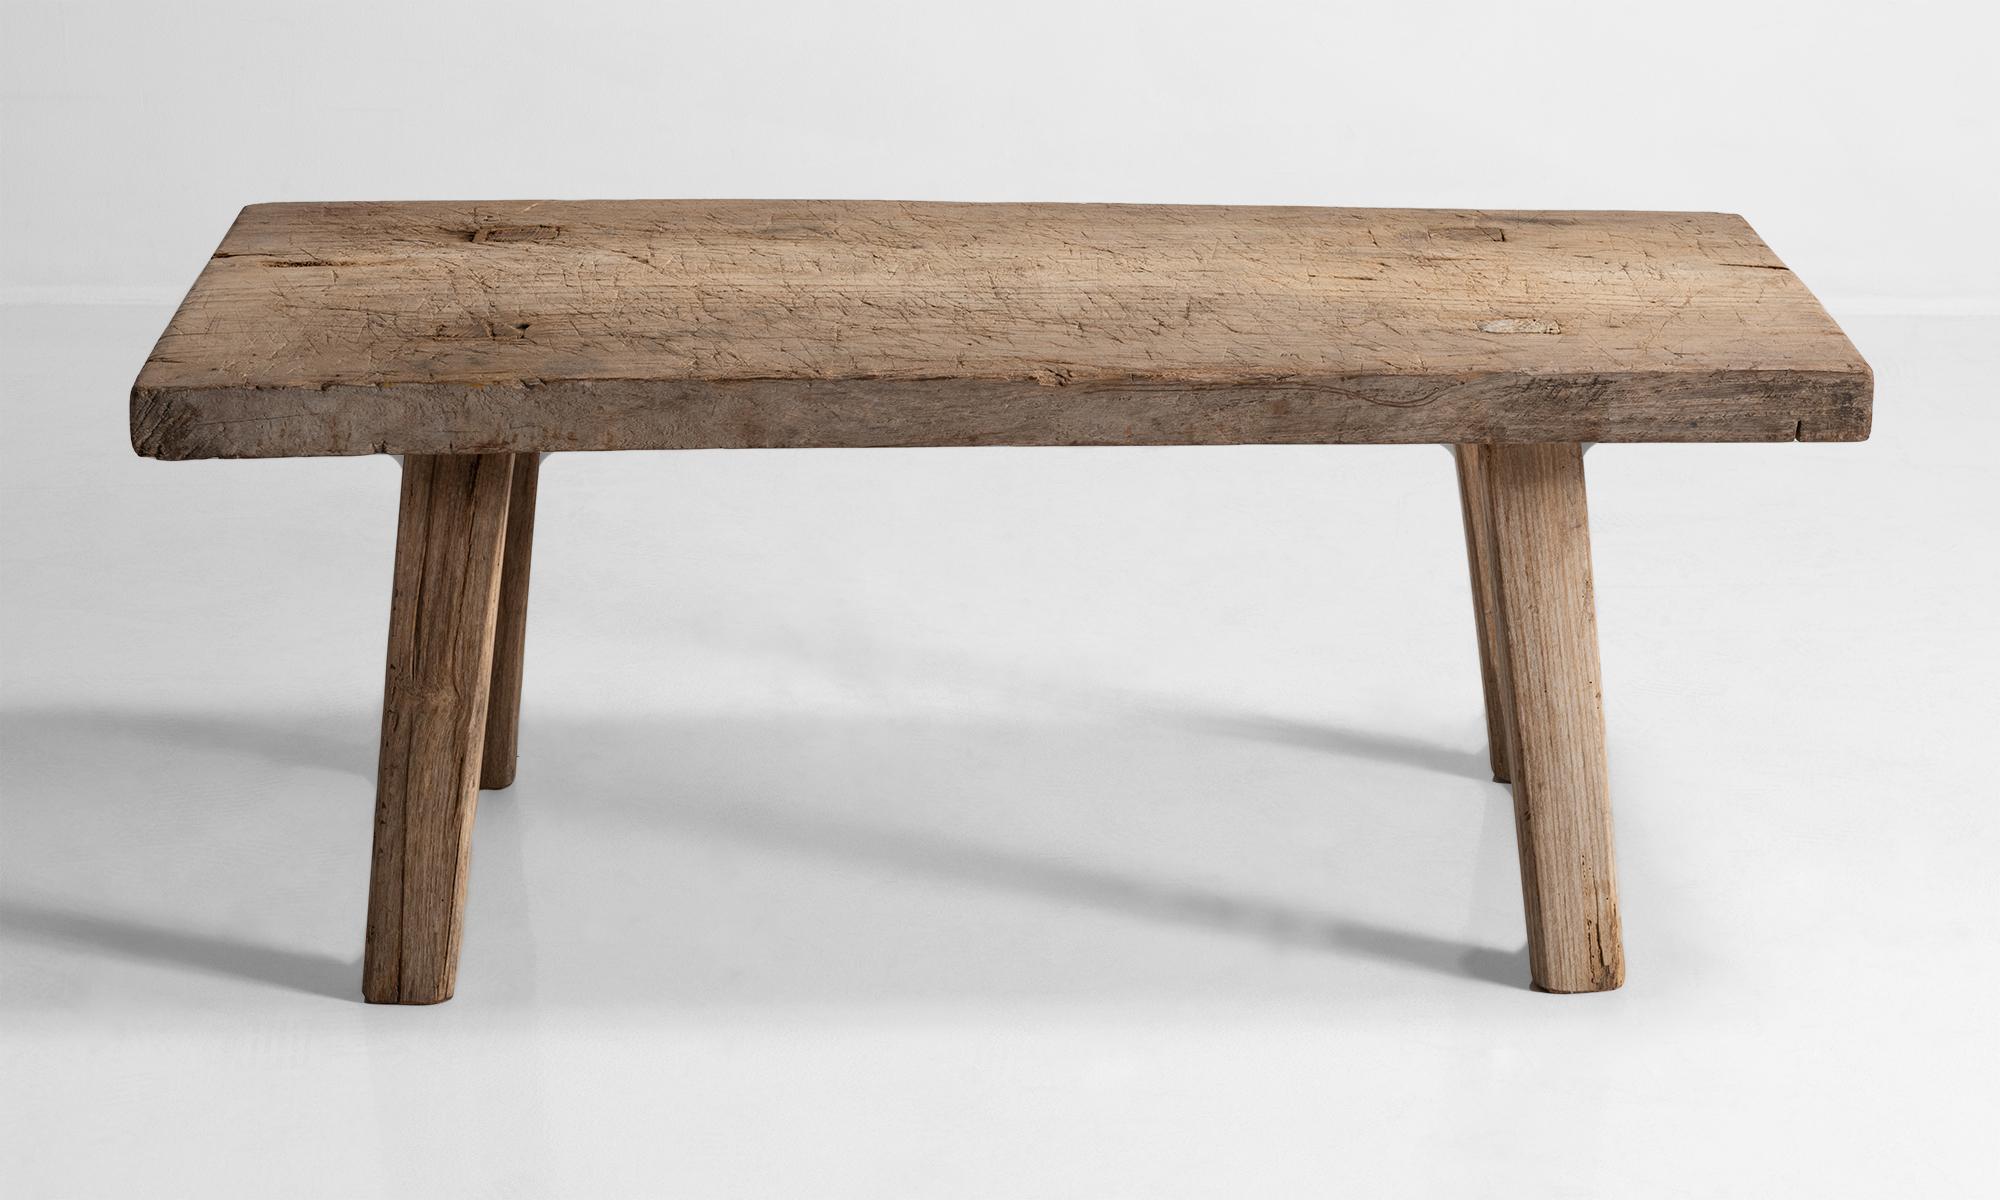 English Primitive Bench / Coffee Table